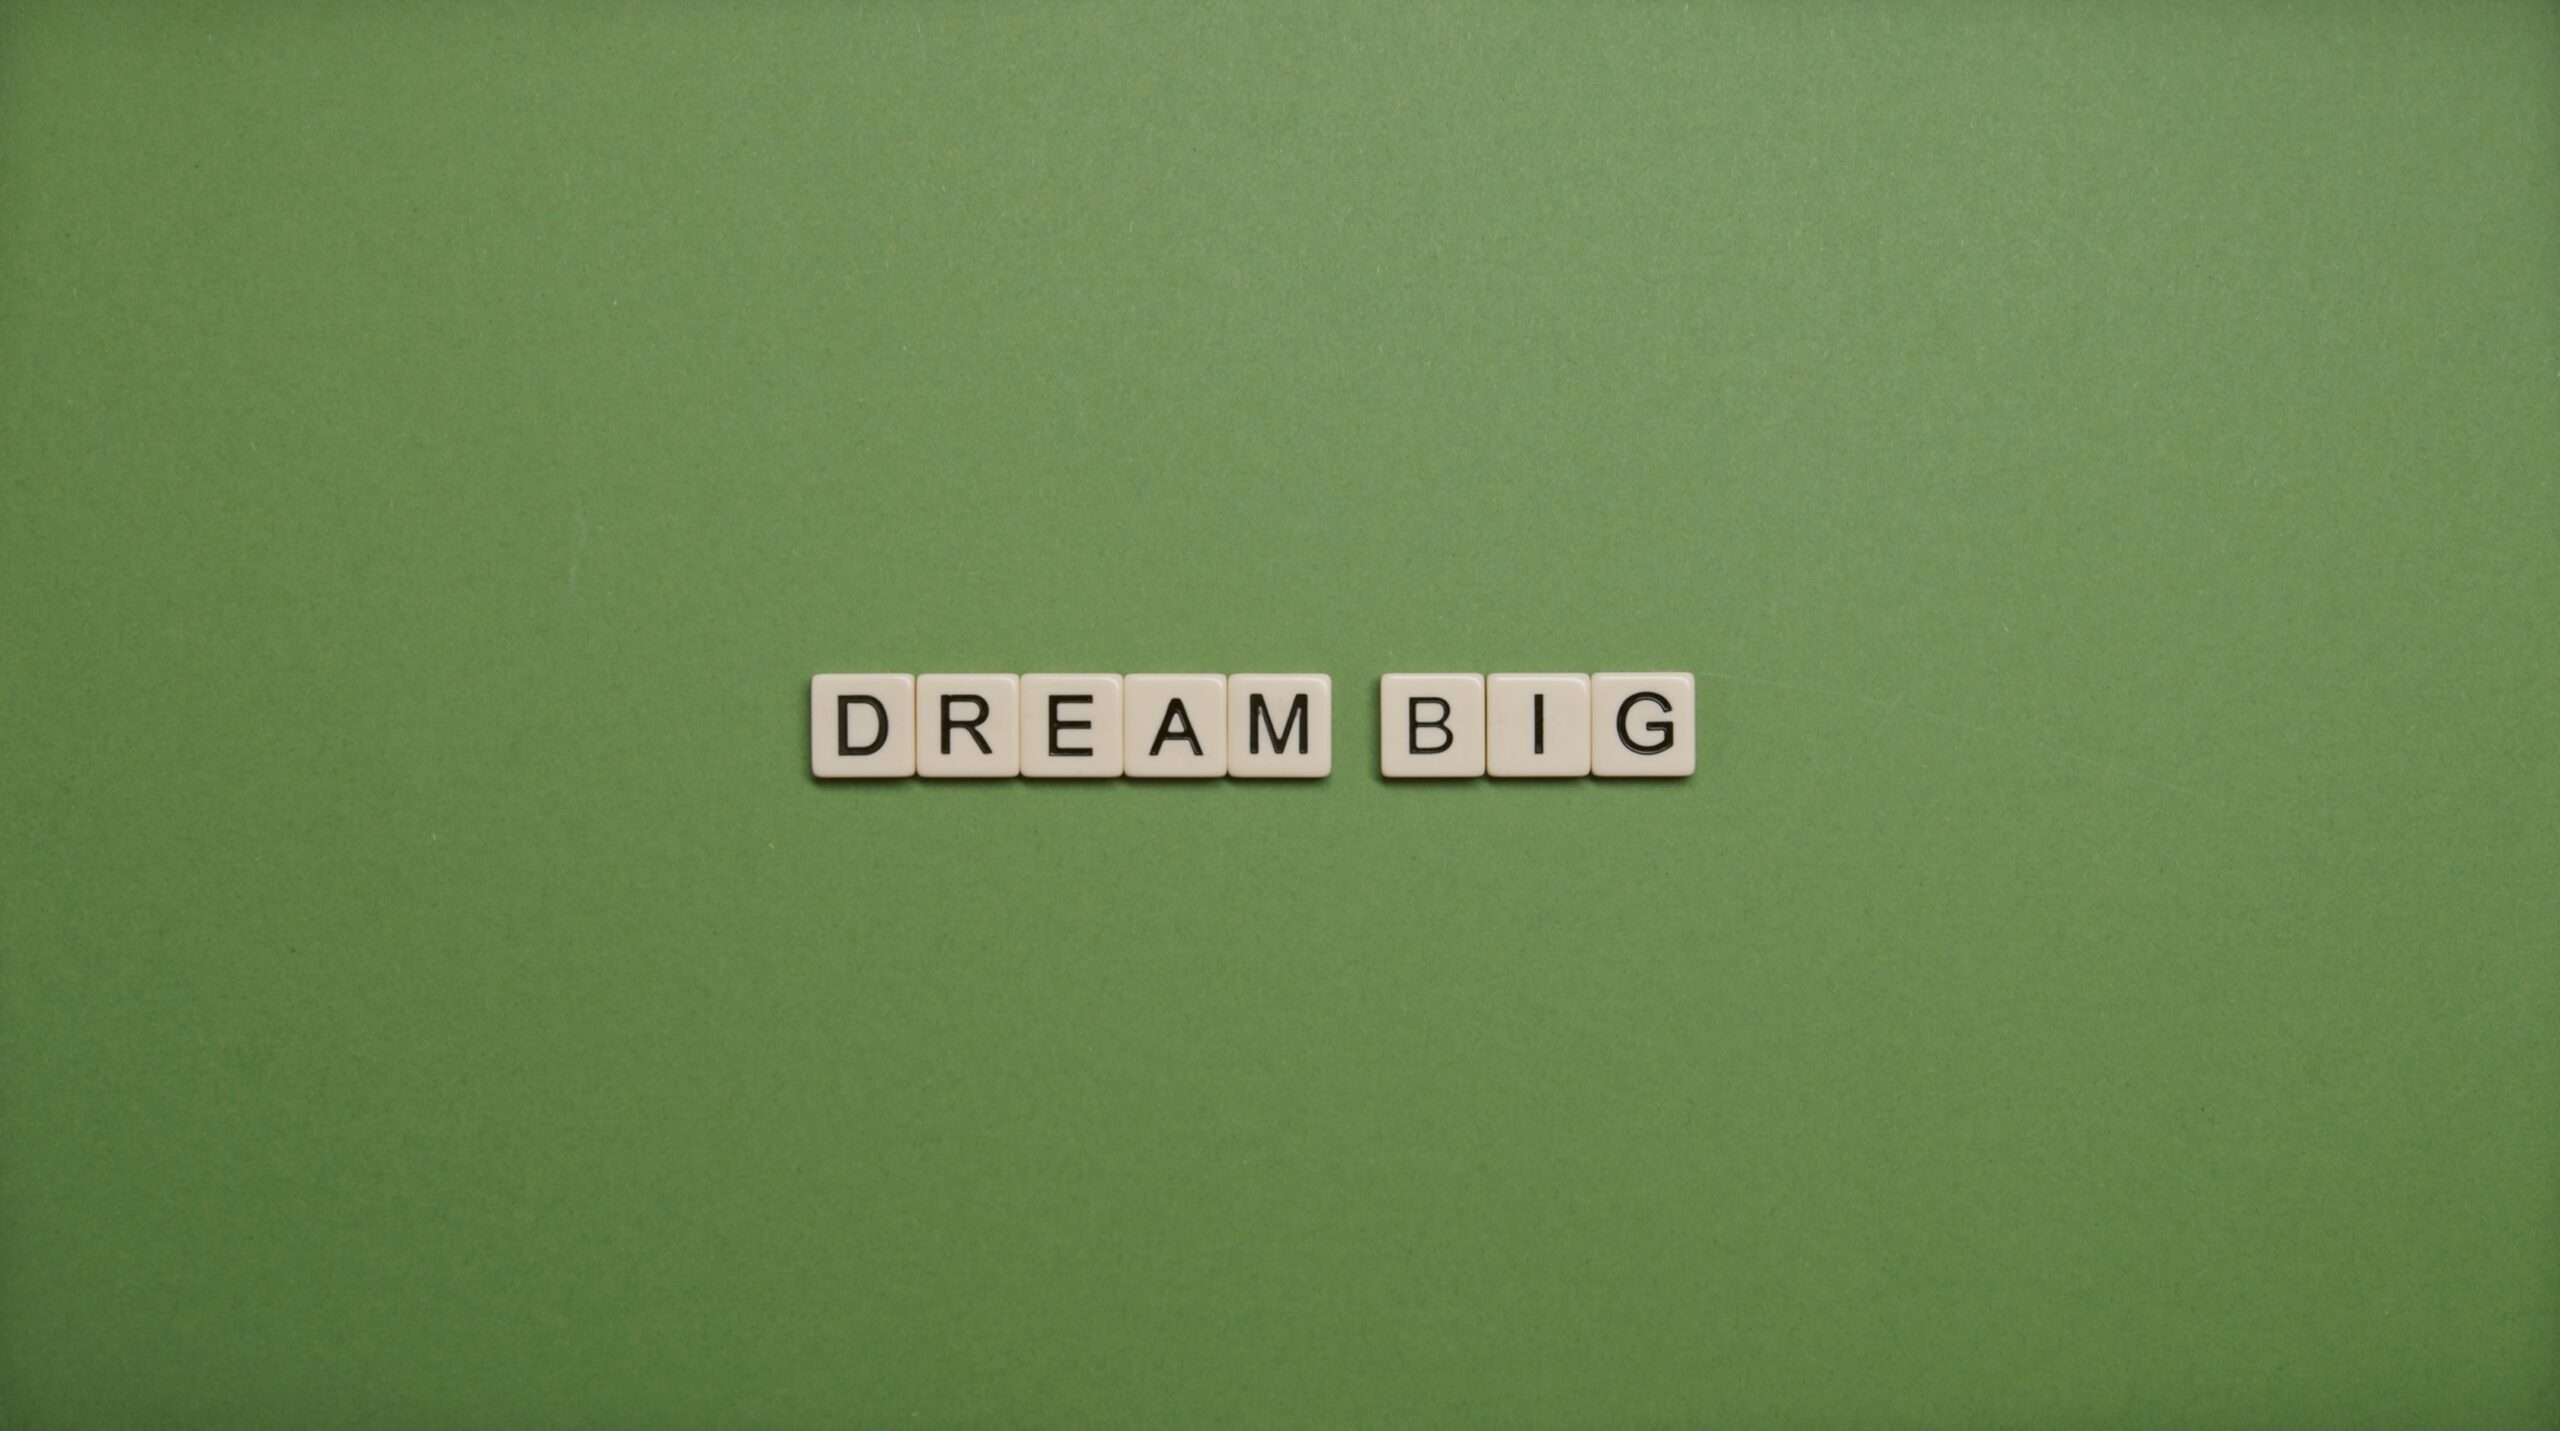 Scrabble letters that spell out "Dream Big"